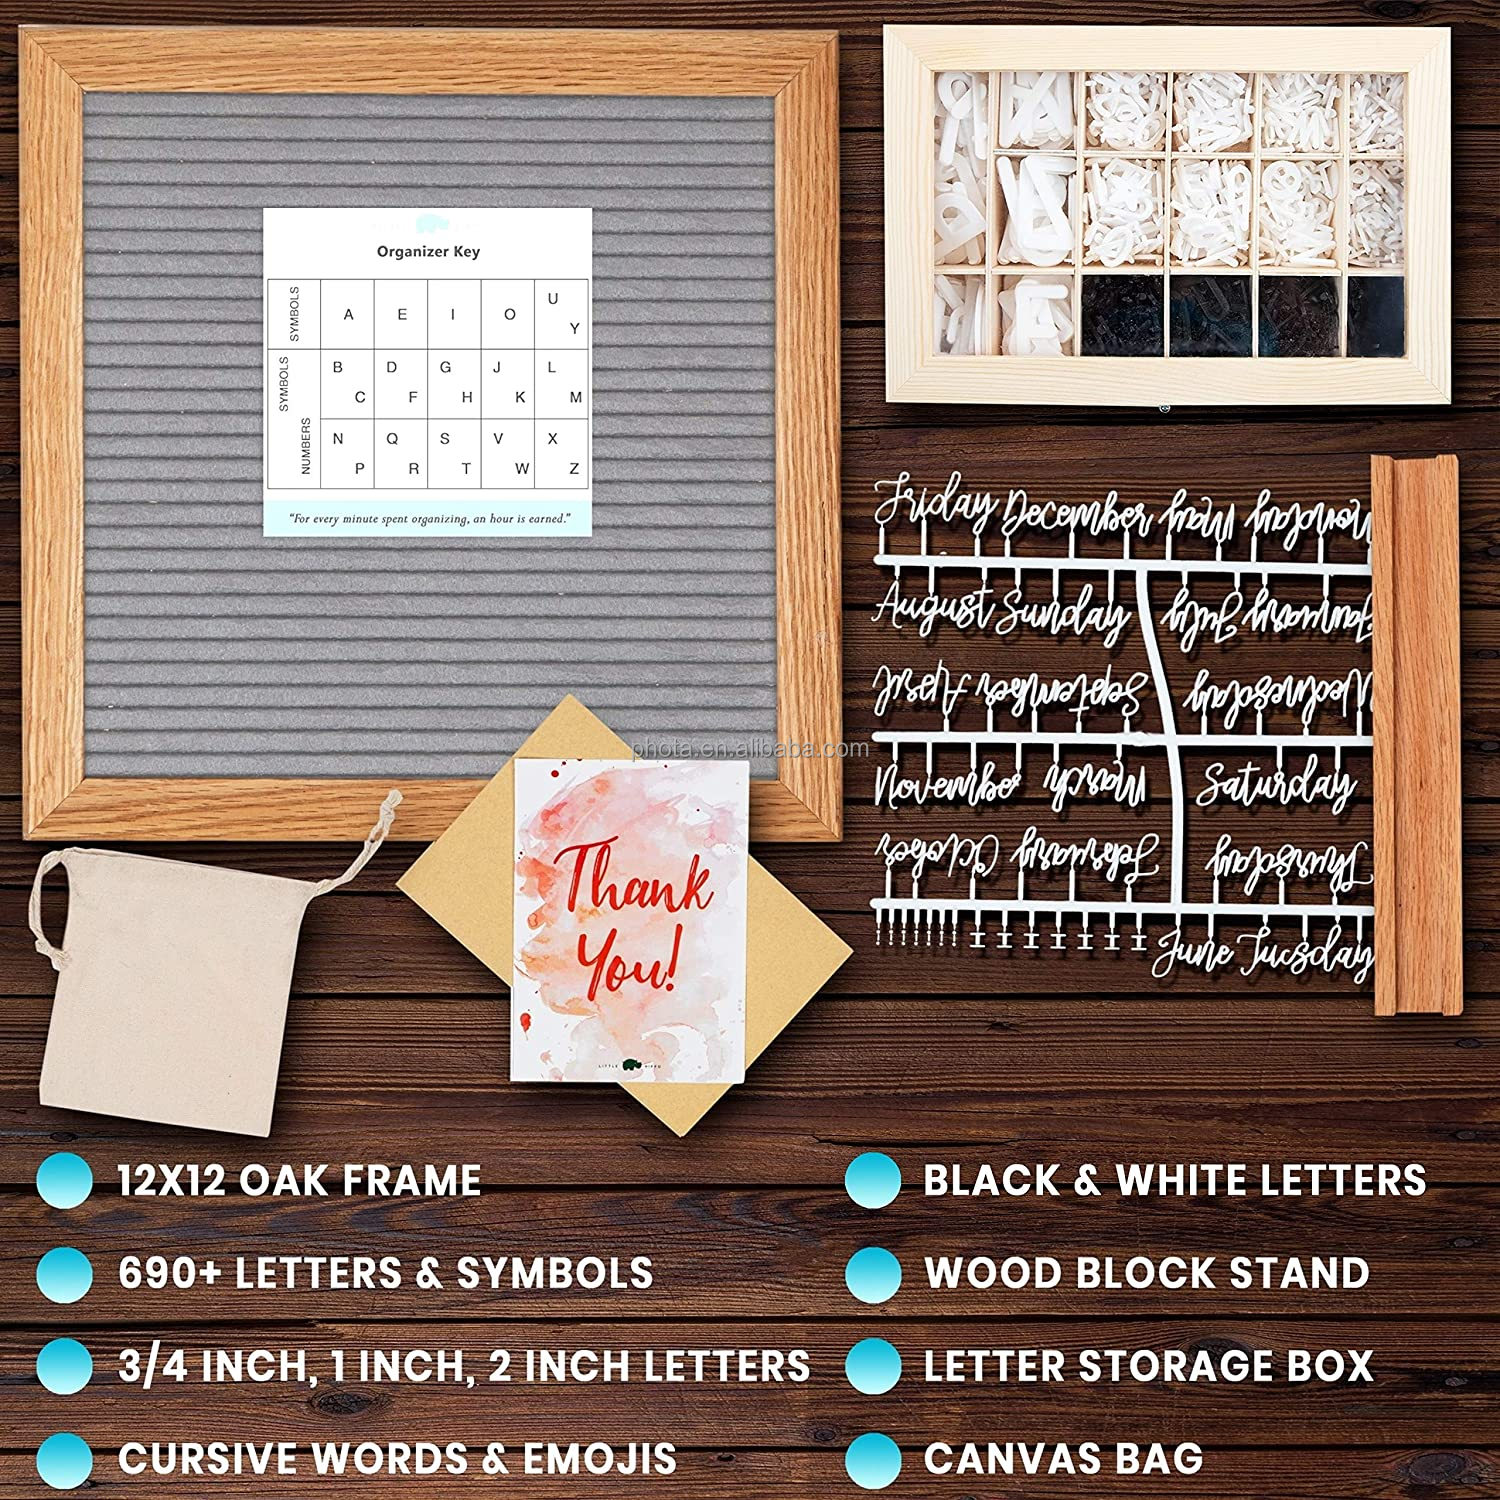 Letter Board 12"x12" Rustic Double Sided (Black & Gray) +690 Pre-Cut Letters Upgraded Wooden Sorting Tray